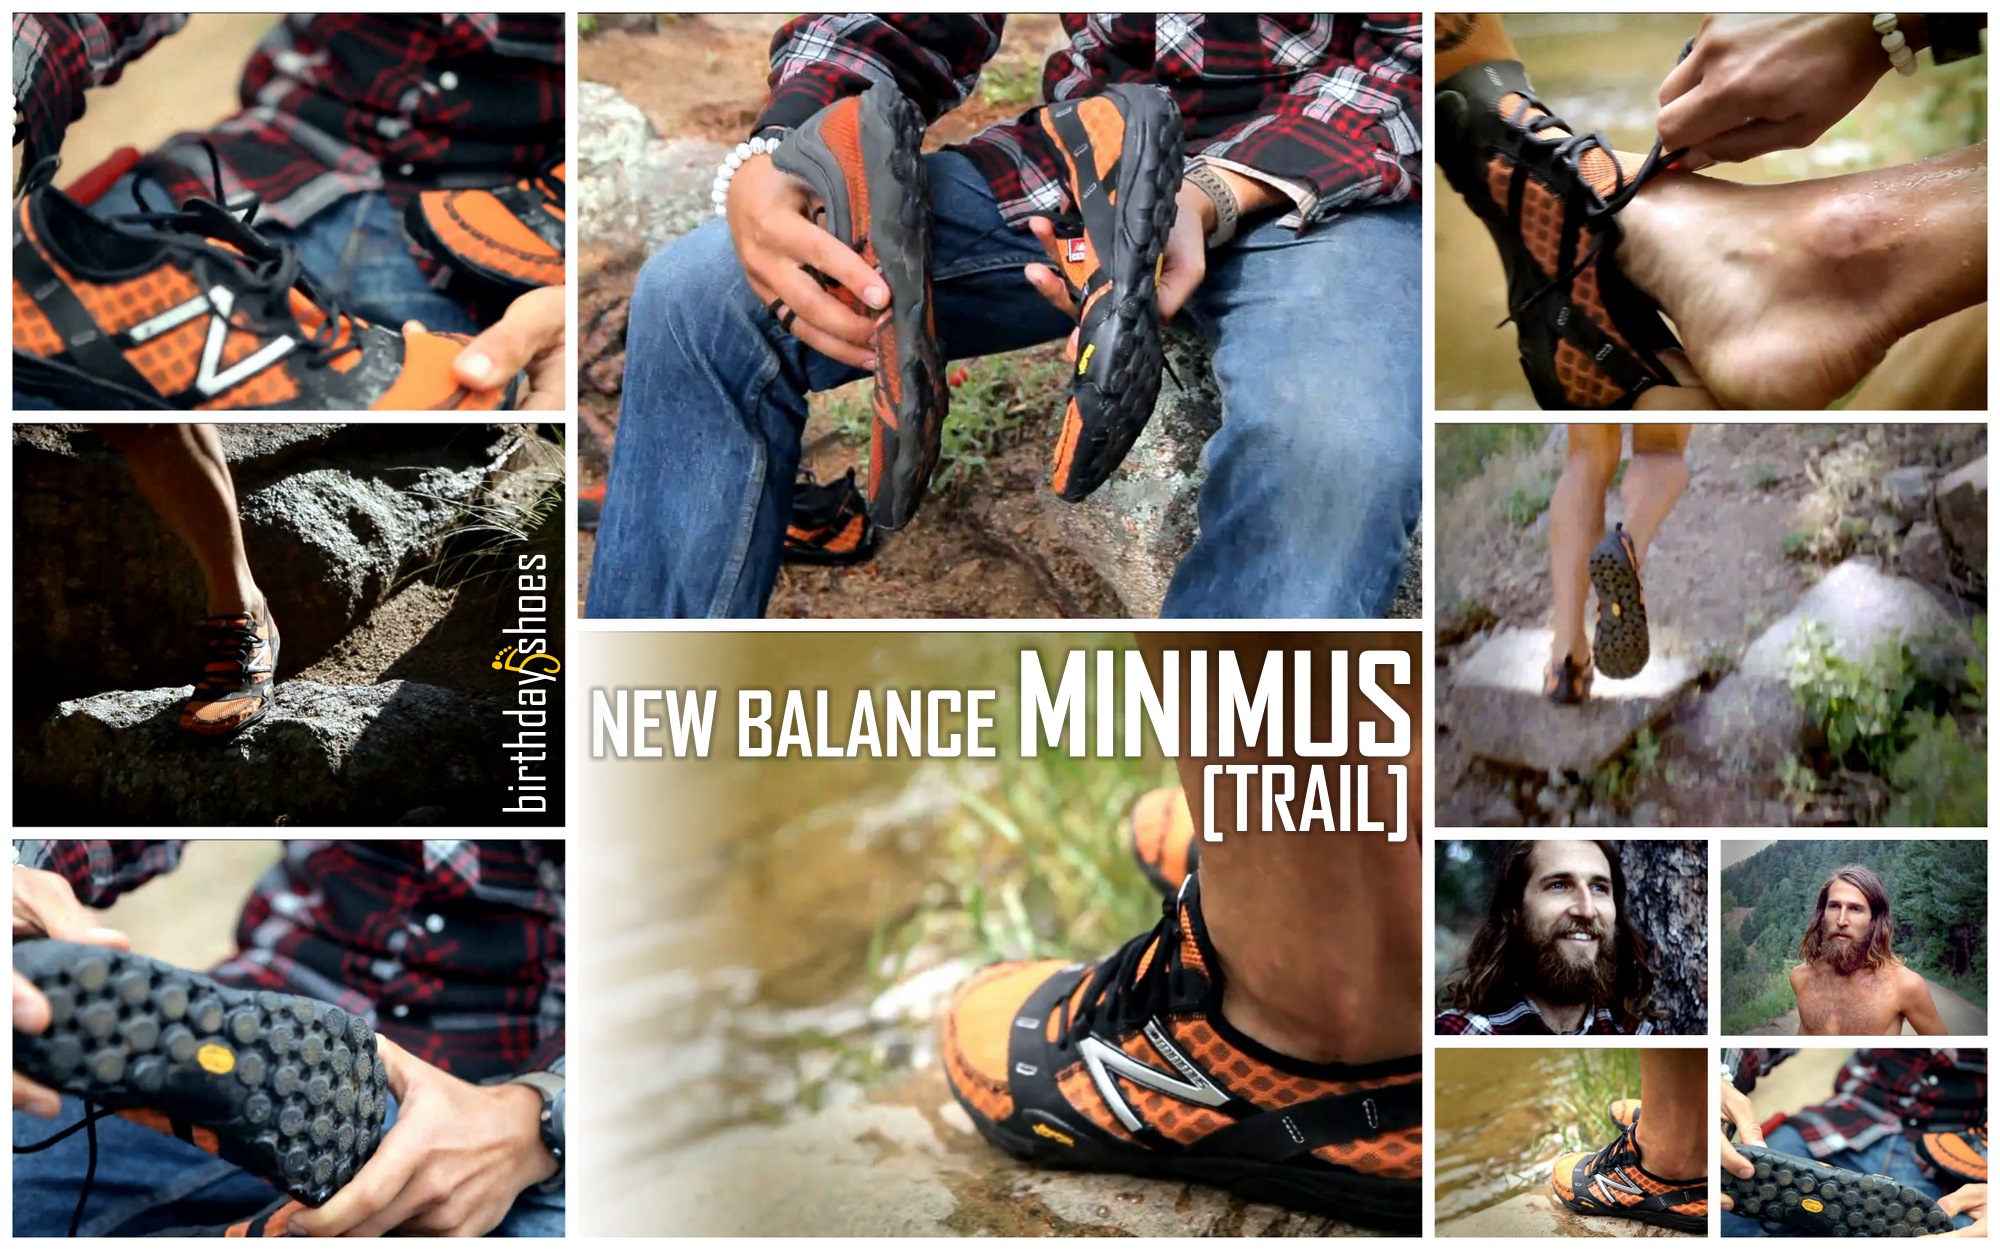 Screen captures of the New Balance Minimus Trail "barefoot running shoe" set to be released in 2011 by NB. The video these shots were pulled from features ultramarathoner Anton Krupicka.